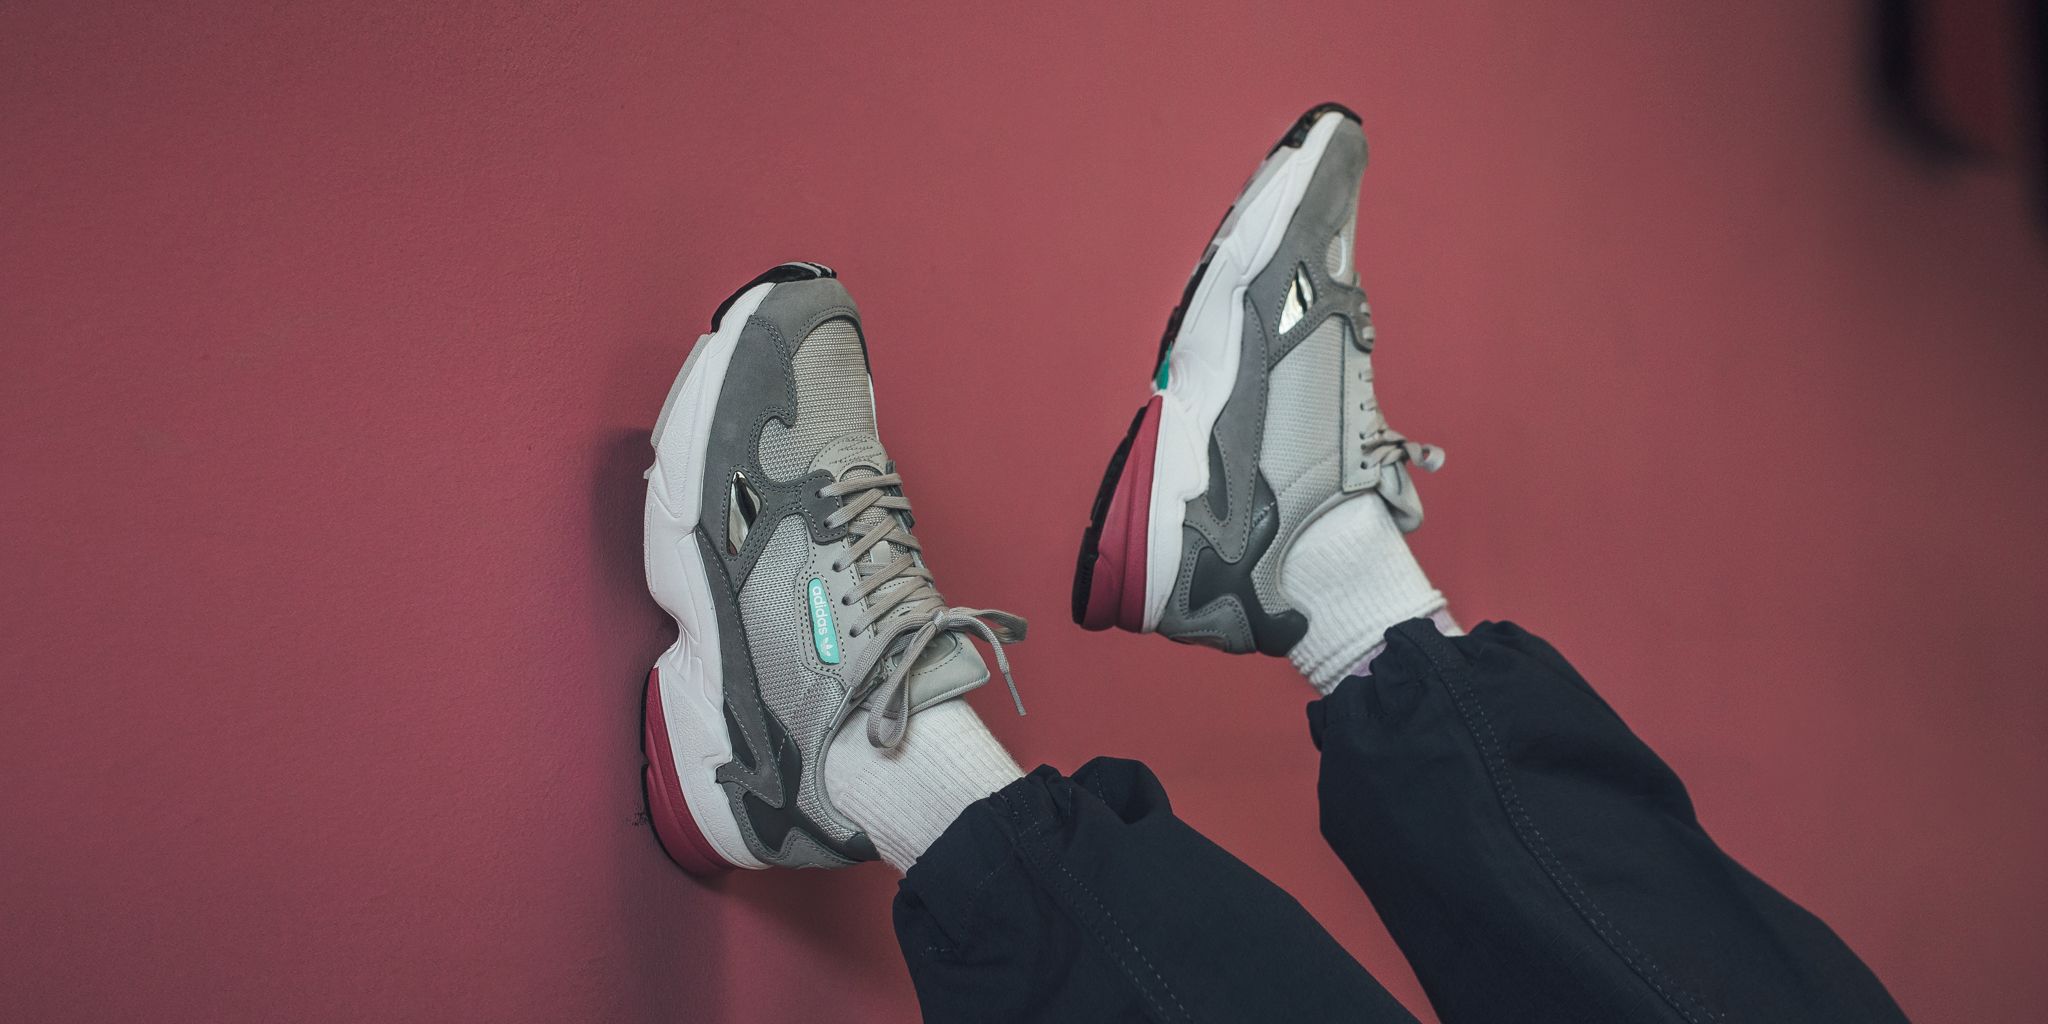 adidas falcon trainers grey two trace maroon